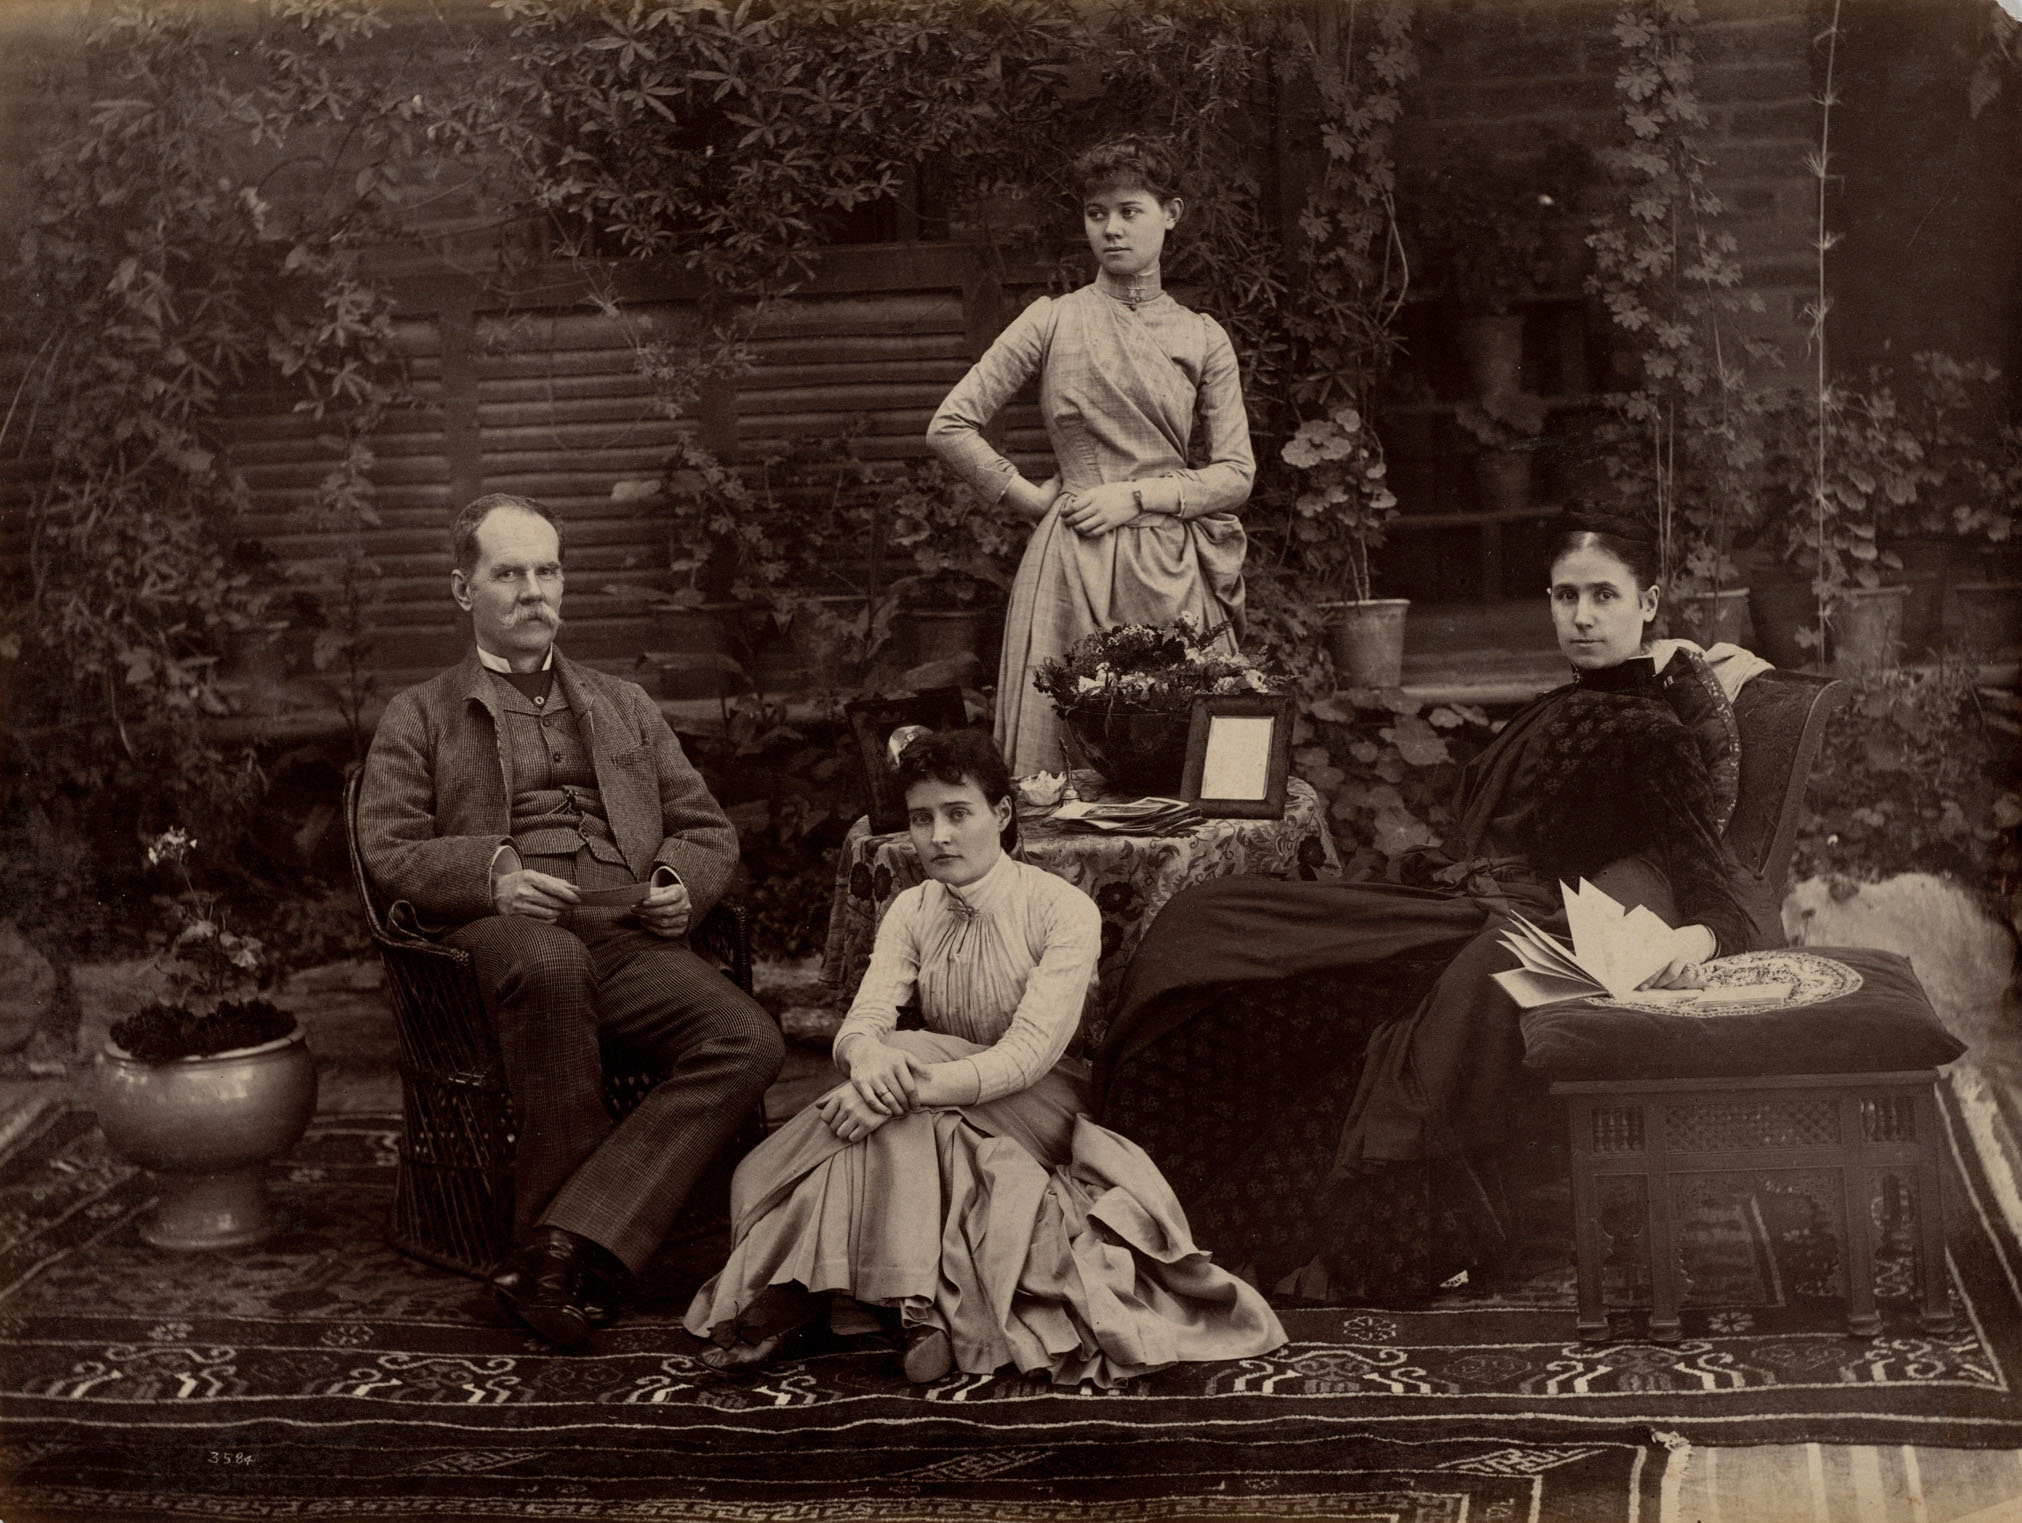 A sepia-toned photograph of the colonial administrator Auckland Colvin with his wife and two daughters seated in a garden.